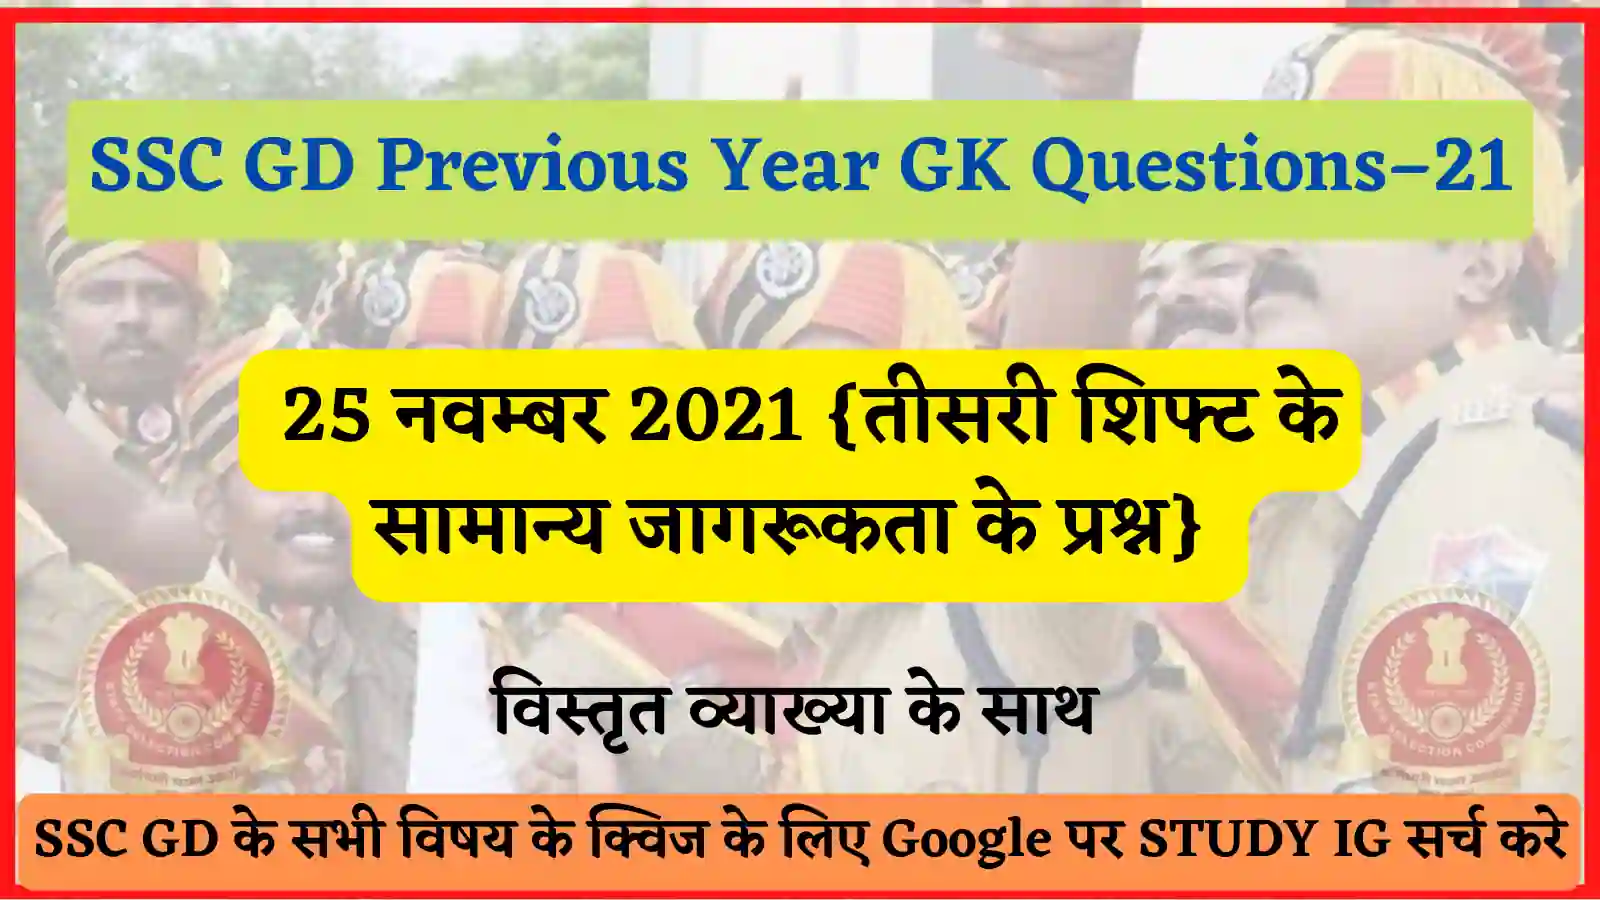 SSC GD Previous Year GK Questions / Quiz - 21